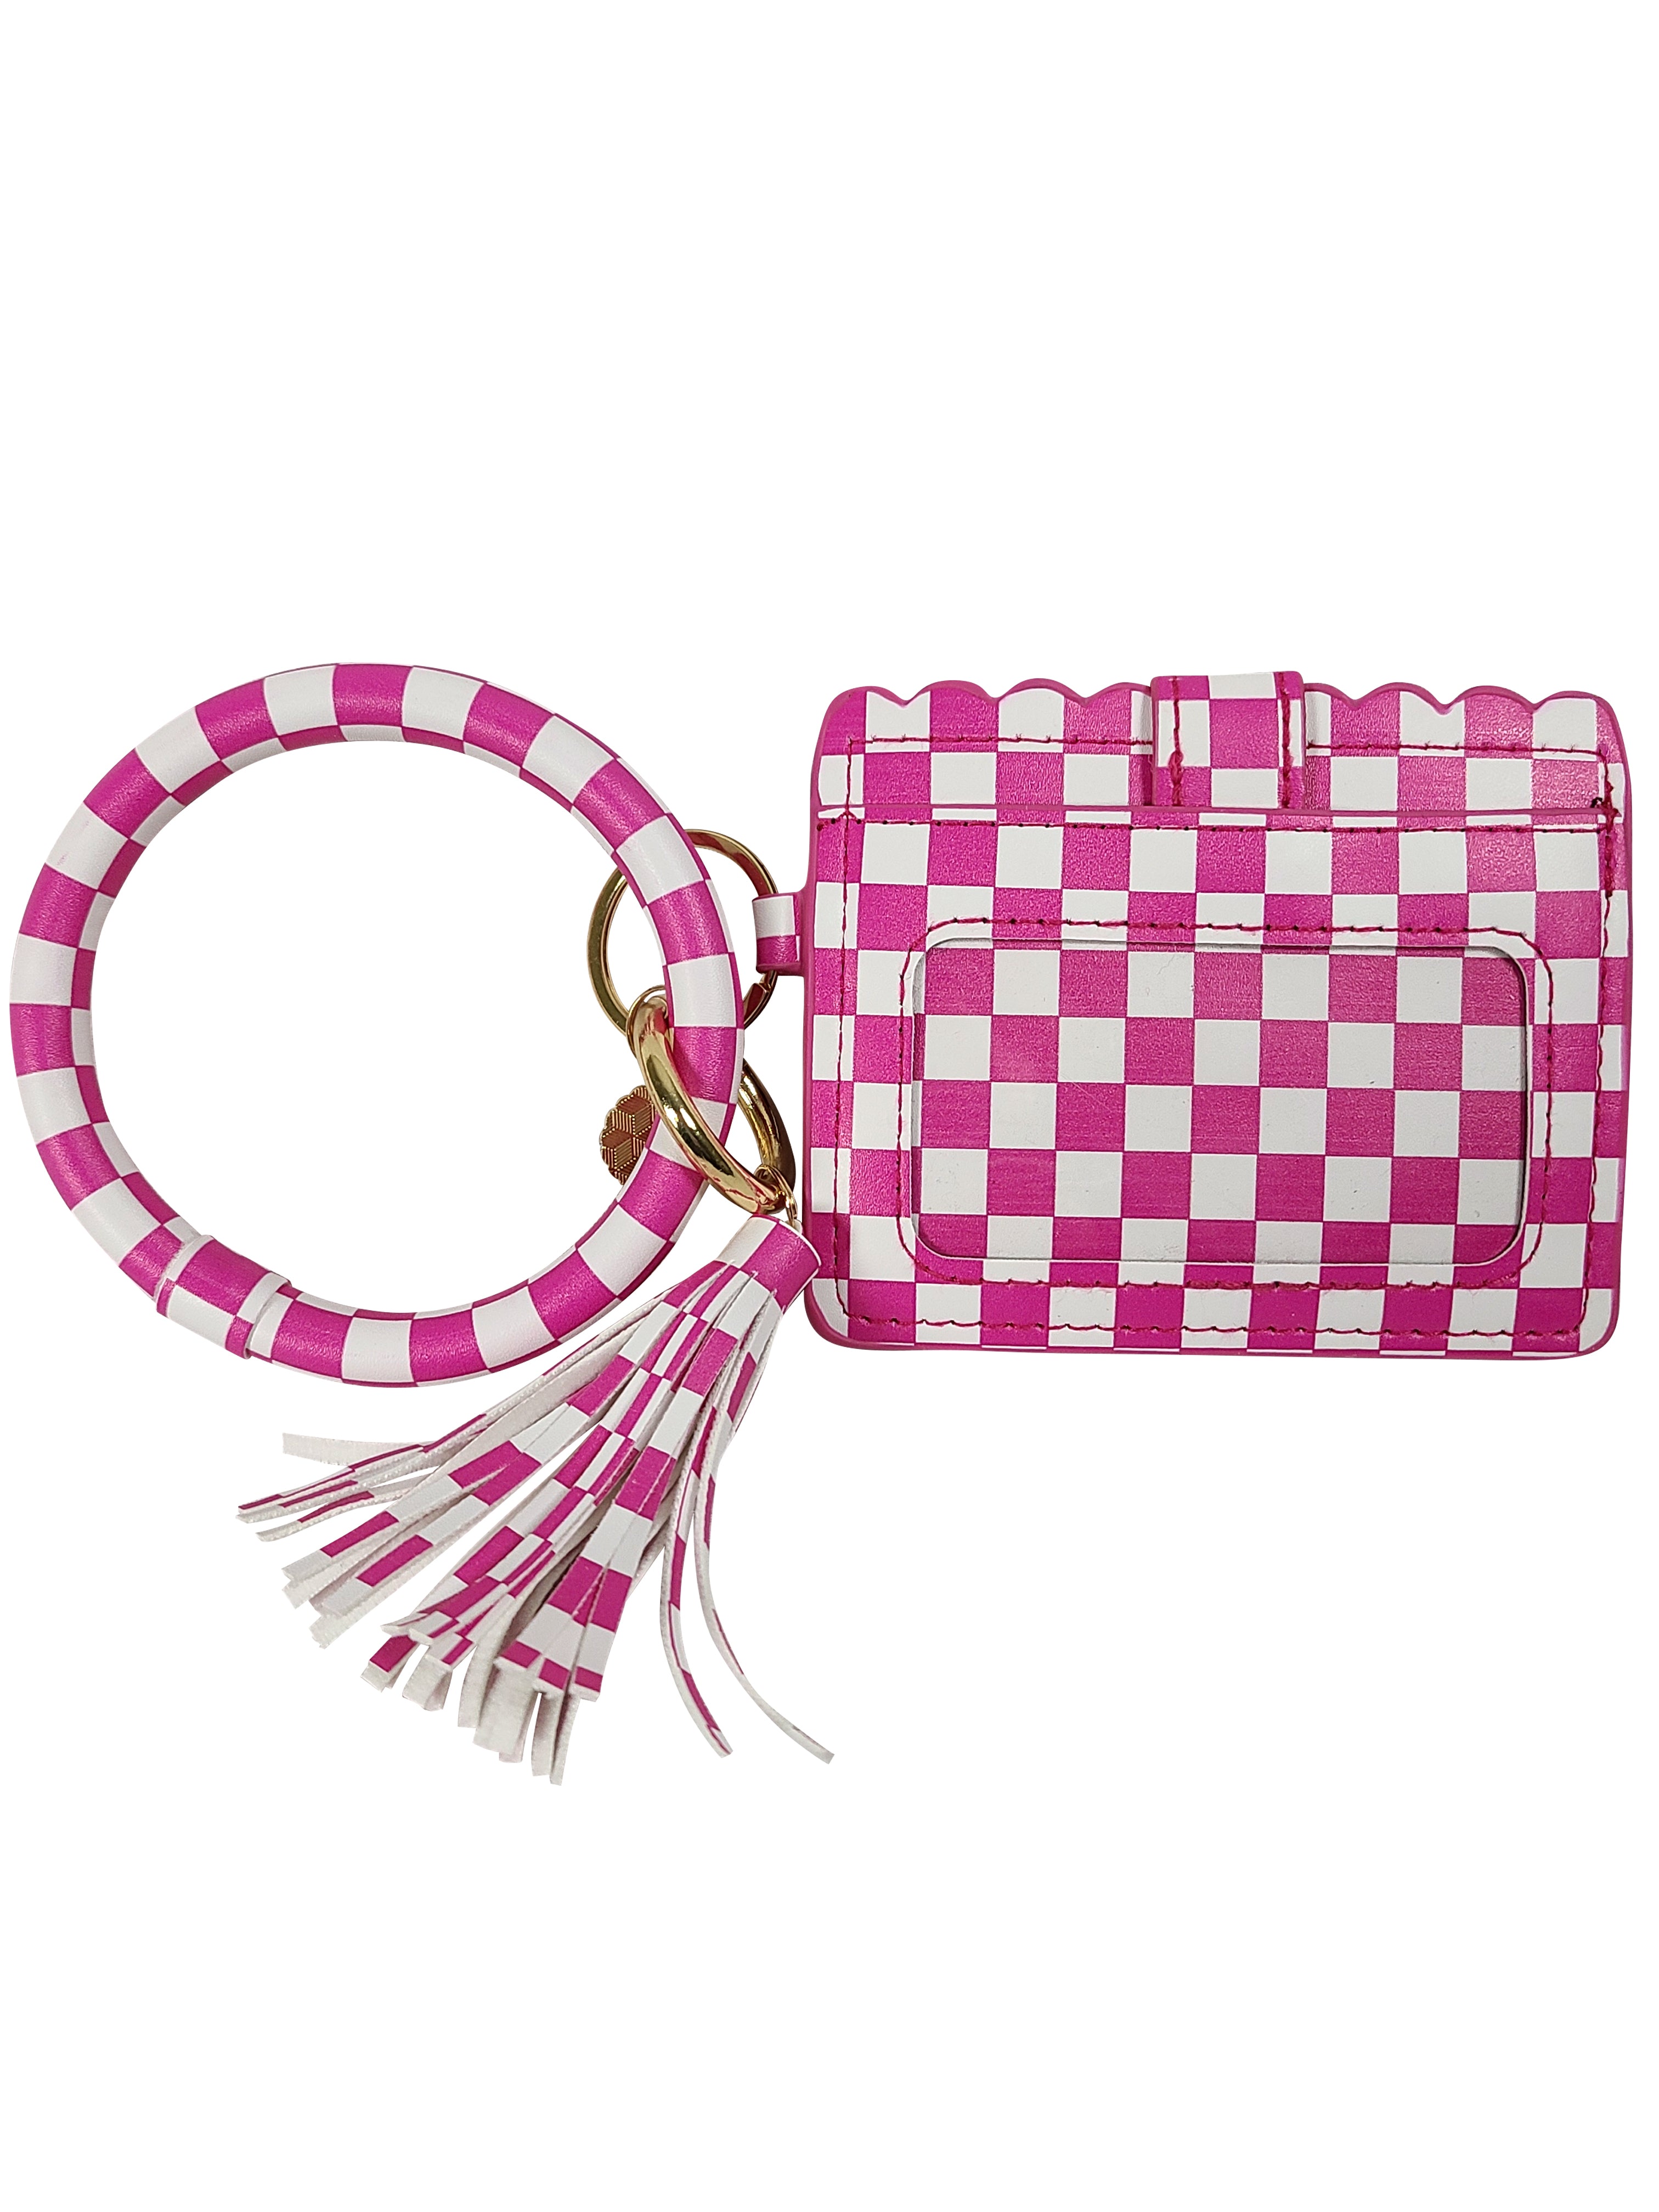 CL-7848 Wristlet ID Wallet Check Pink